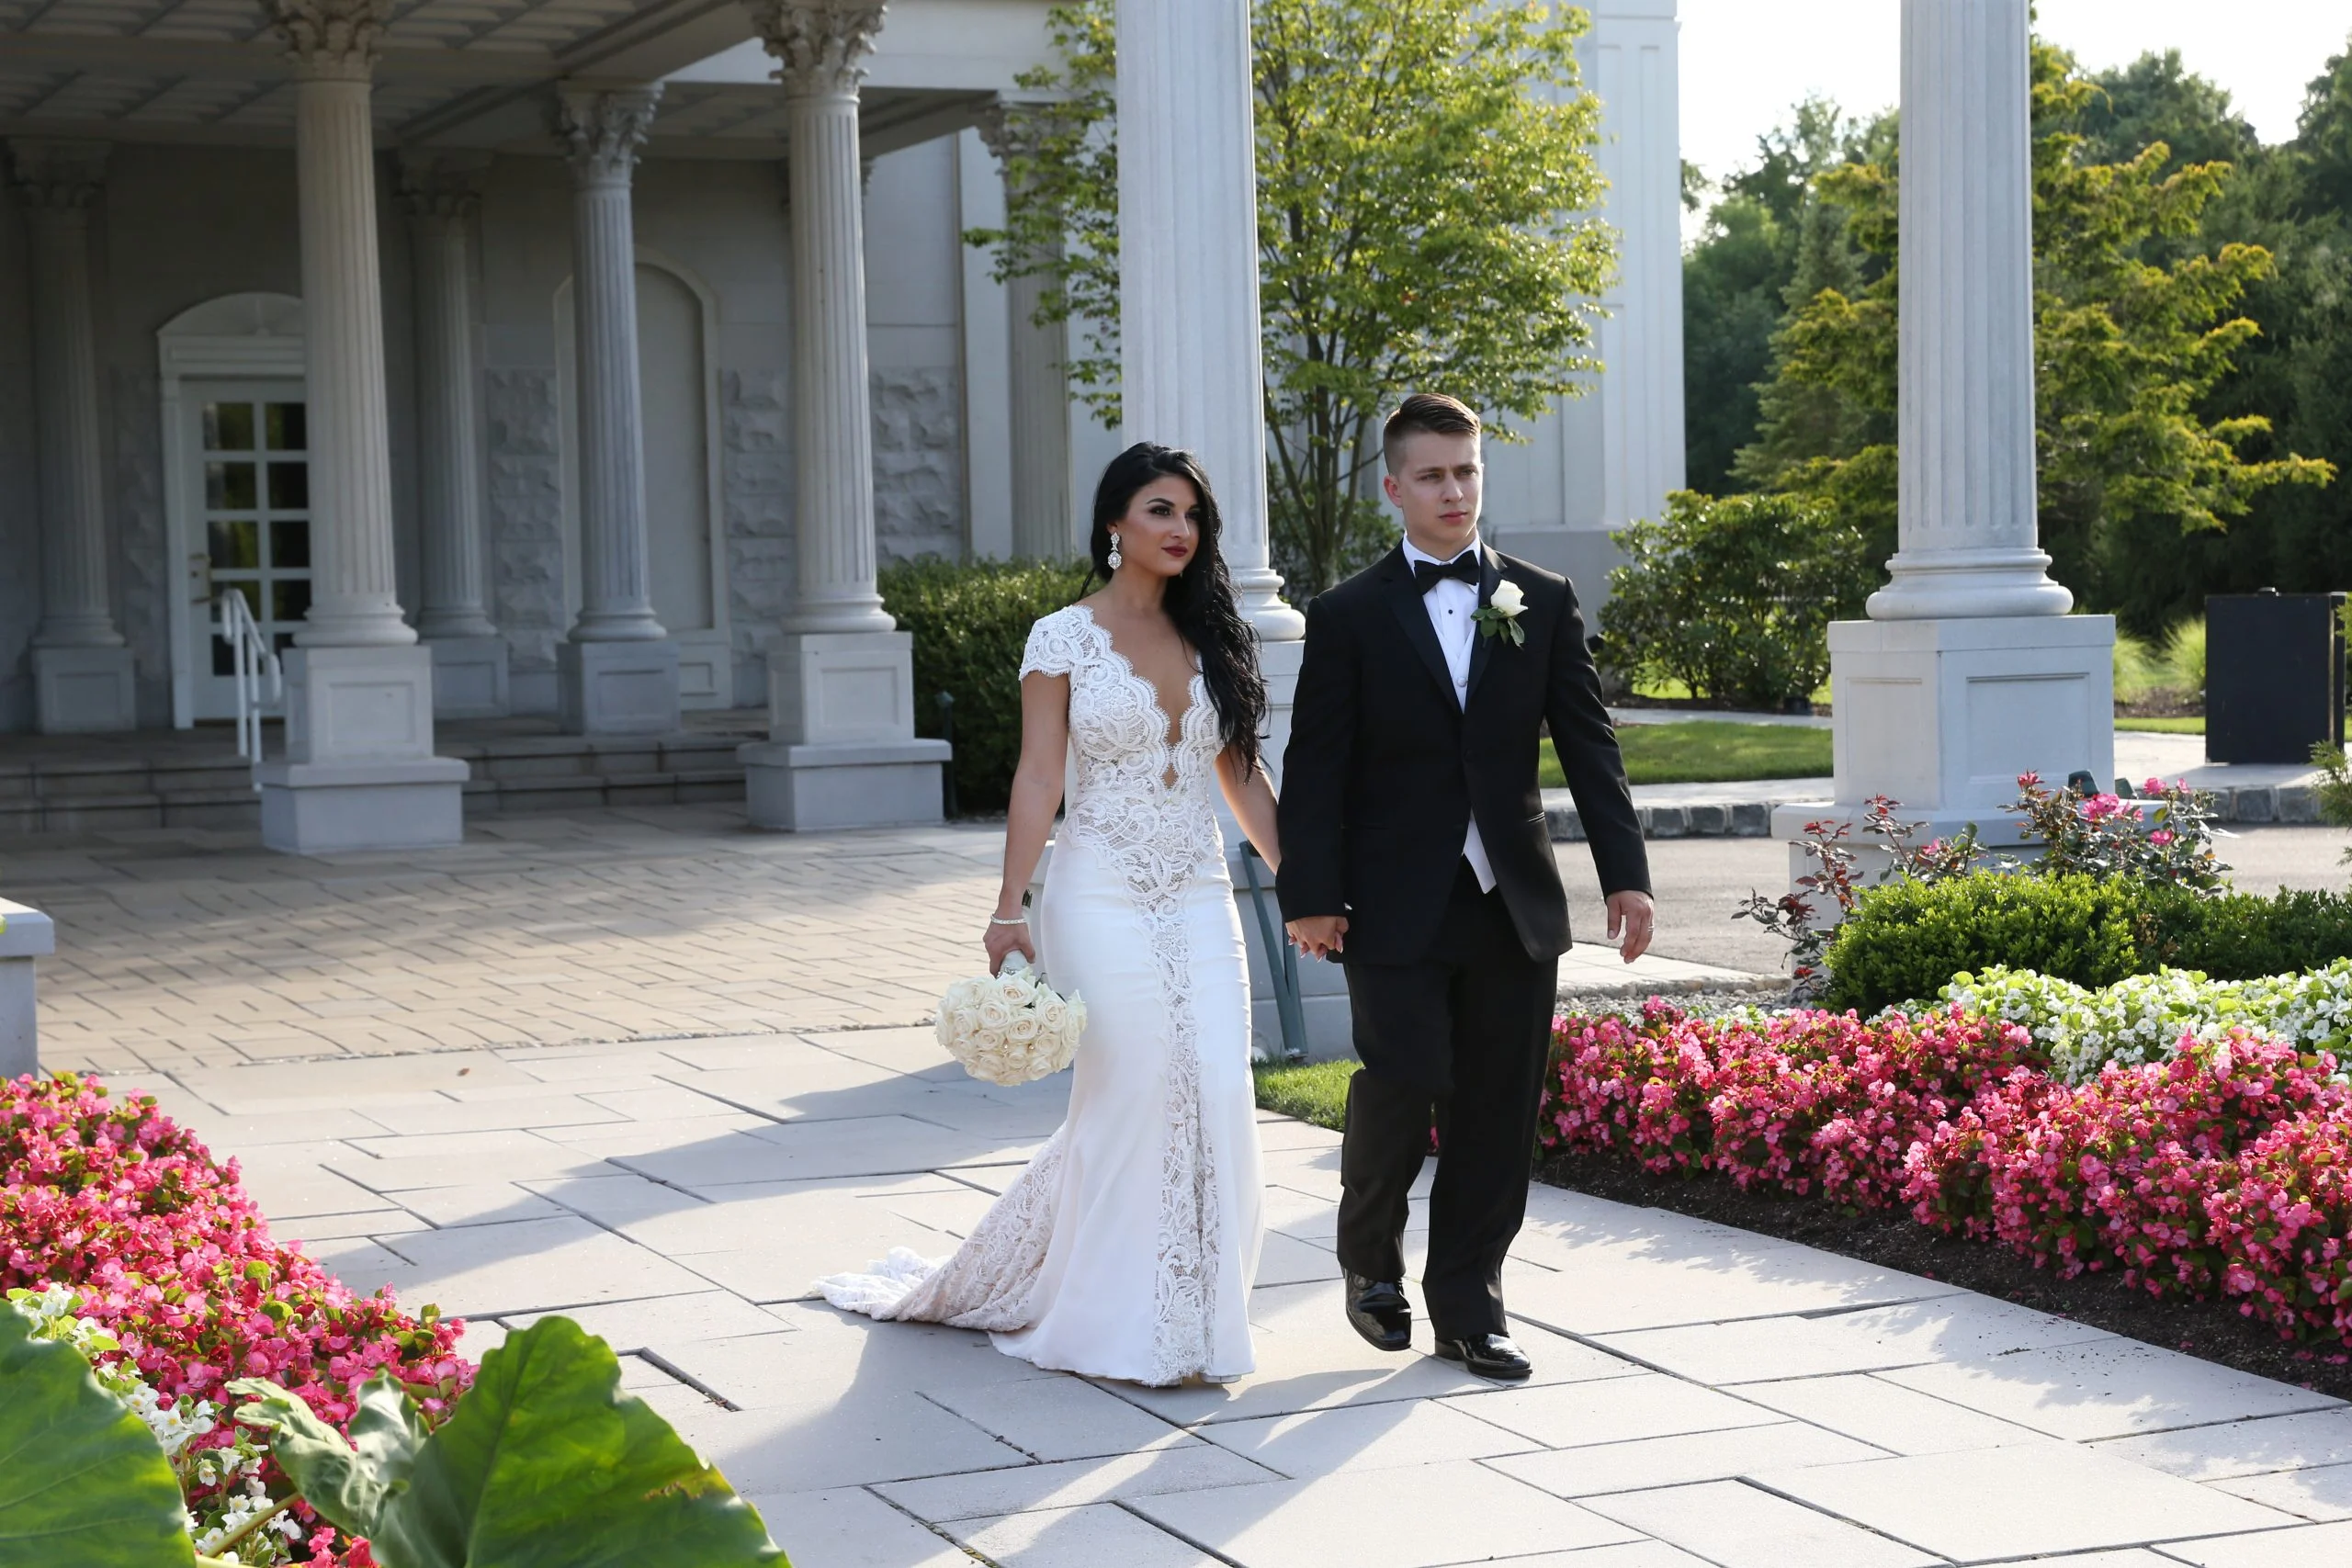 A bride and groom walking down a pathway in front of a mansion.